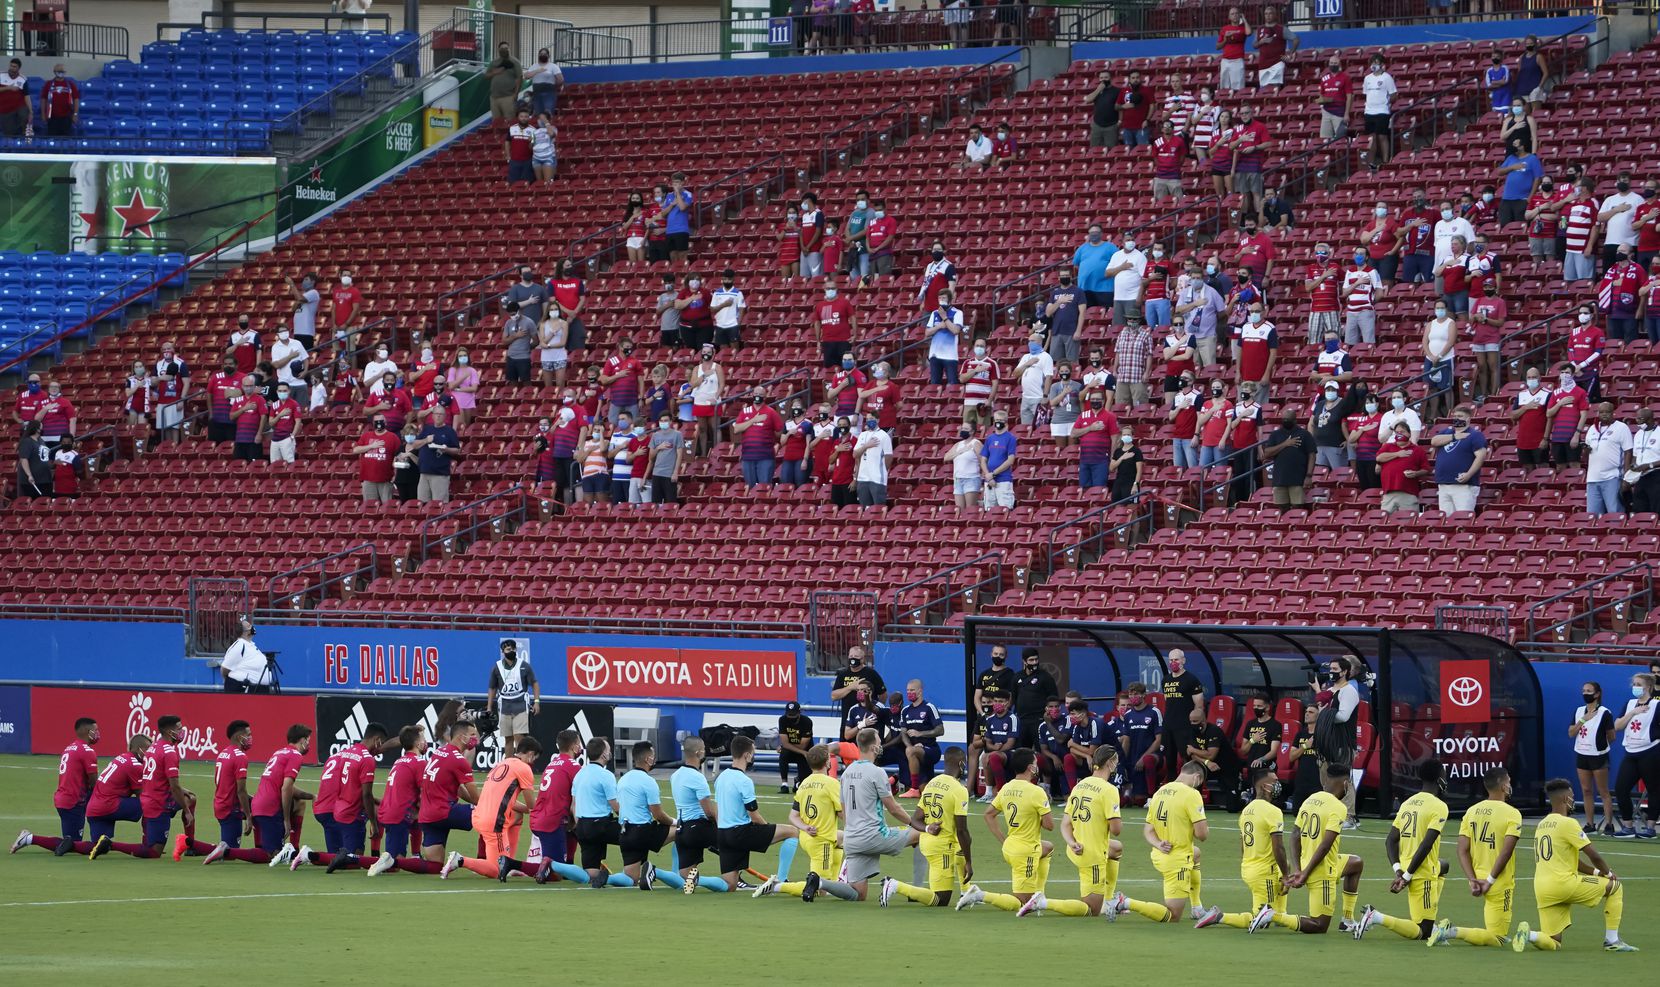 FC Dallas (left) and Nashville SC players kneel during the national anthem before an MLS soccer game at Toyota Stadium on Wednesday, Aug. 12, 2020, in Frisco, Texas. (Smiley N. Pool/The Dallas Morning News)